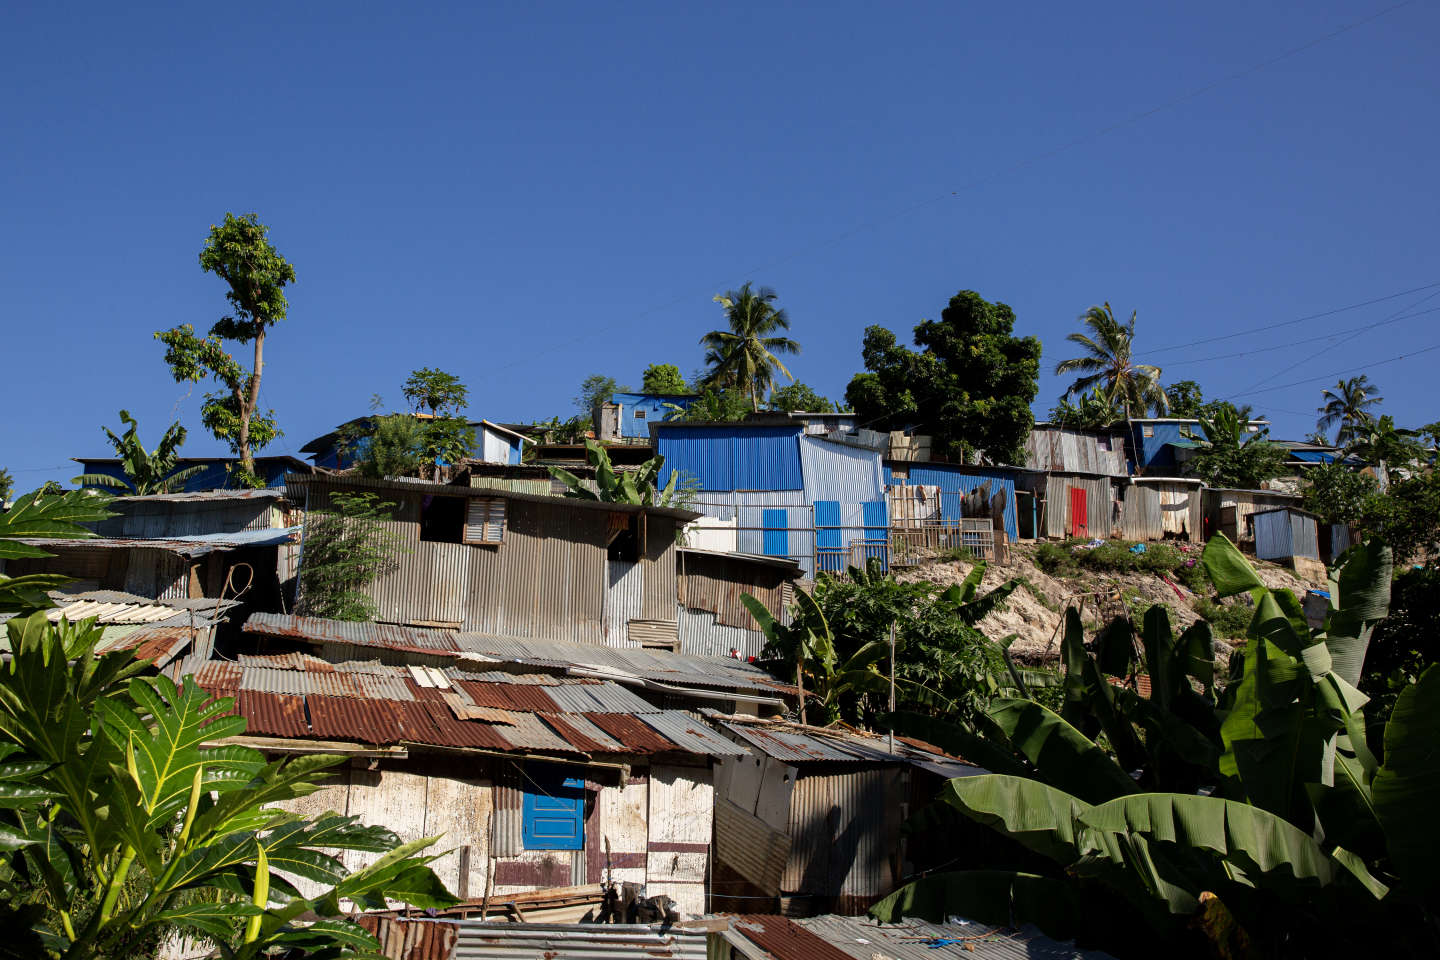 Cyrille Hanappe, architect: “In Mayotte, slums are a lesser evil”